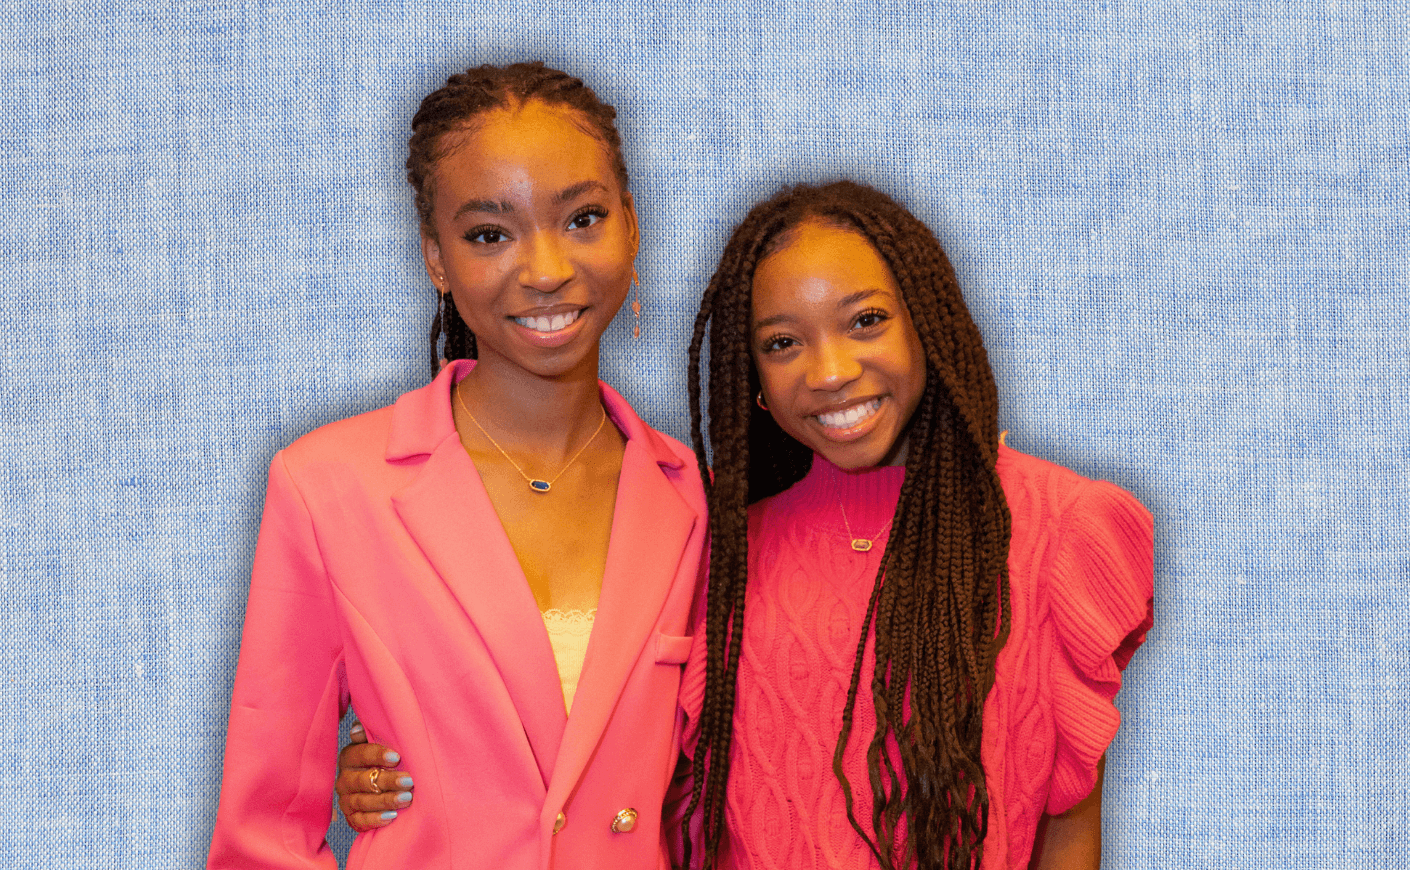 teen sisters on a blue background